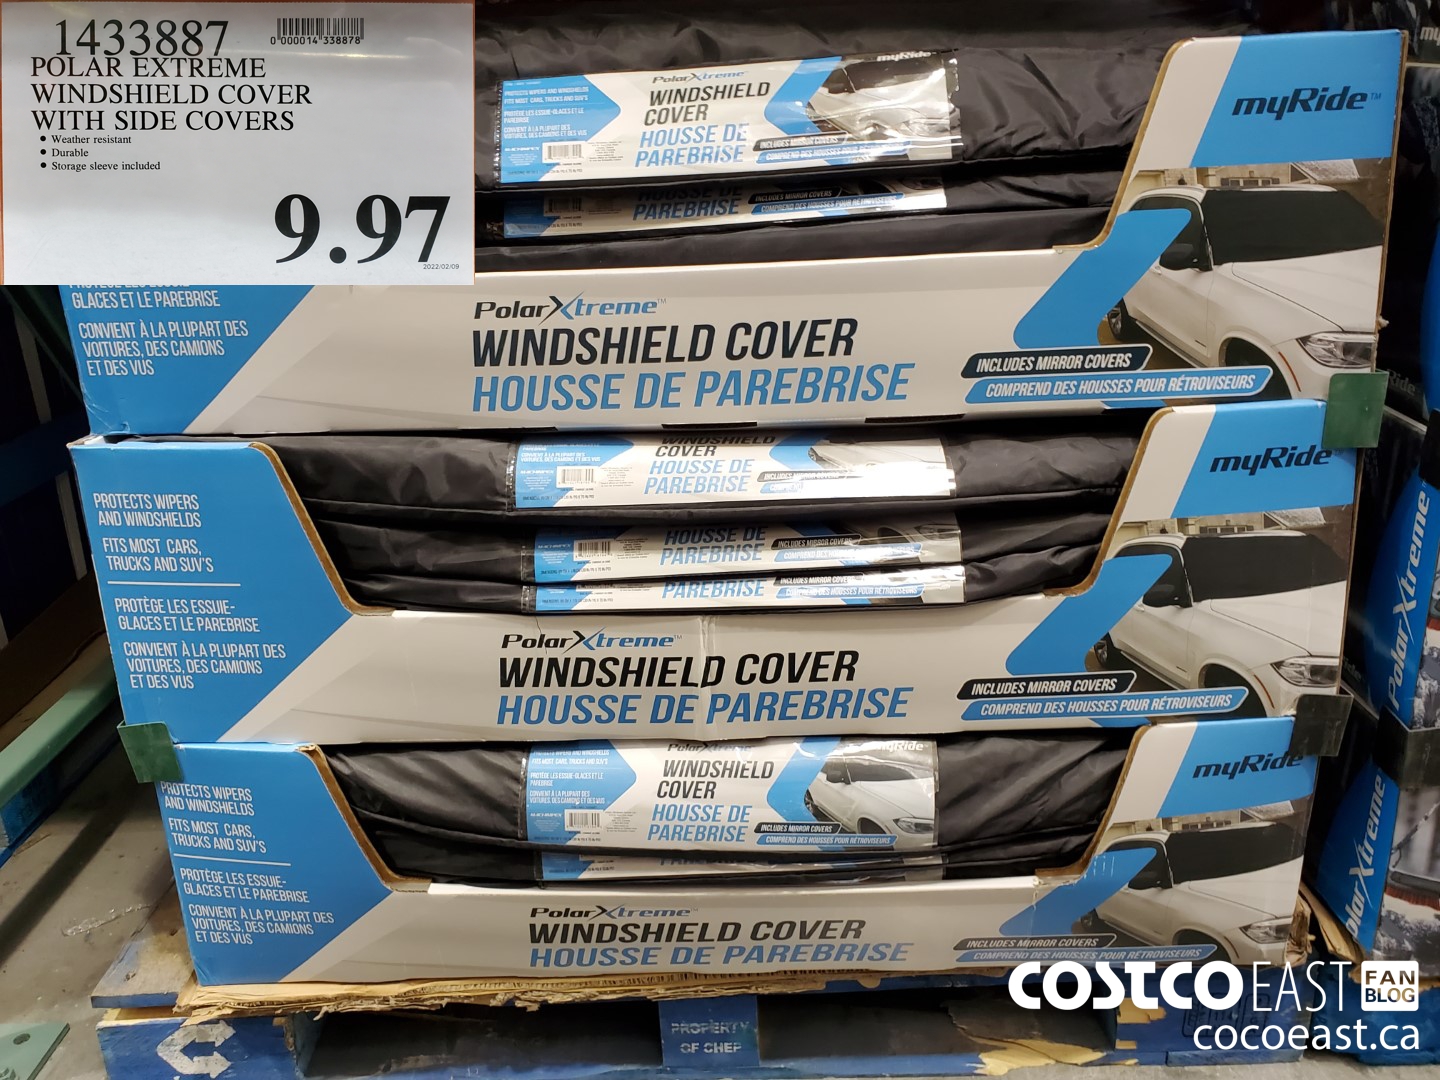 https://east.cocowest1.ca/uploads/2022/02/POLAR_EXTREME_WINDSHIELD_COVER_WITH_SIDE_COVERS_20220211_50042.jpg